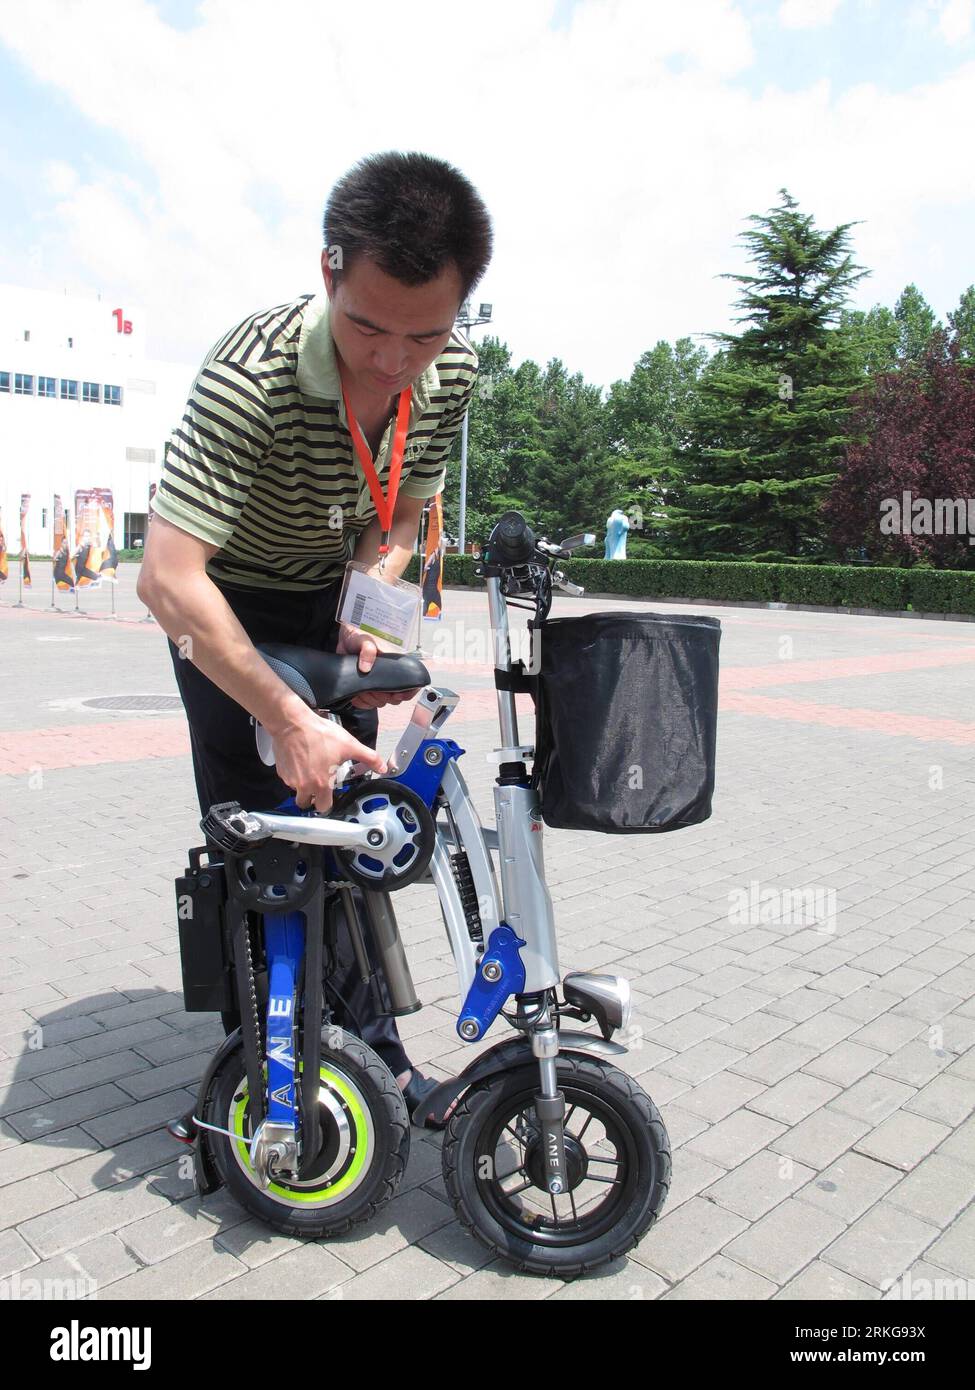 Bildnummer: 55567085  Datum: 03.07.2011  Copyright: imago/Xinhua (110703) -- BEIJING, July 3, 2011 (Xinhua) -- An exhibitor shows a folding electric bicycle at an exhibition in Beijing, capital of China, July 3, 2011. An exhibition of electric vehicles, hybrid vehicles and of clean vehicles and auto parts was held in Beijing on Sunday. (Xinhua/Yuan Jing) (llp) CHINA-BEIJING-CLEAN VEHICLES AND AUTO PARTS EXHIBITION (CN) PUBLICATIONxNOTxINxCHN Wirtschaft Messe Automesse xbs 2011 hoch o0 Klapprad, Fahrrad, Elektrorad    Bildnummer 55567085 Date 03 07 2011 Copyright Imago XINHUA  Beijing July 3 20 Stock Photo